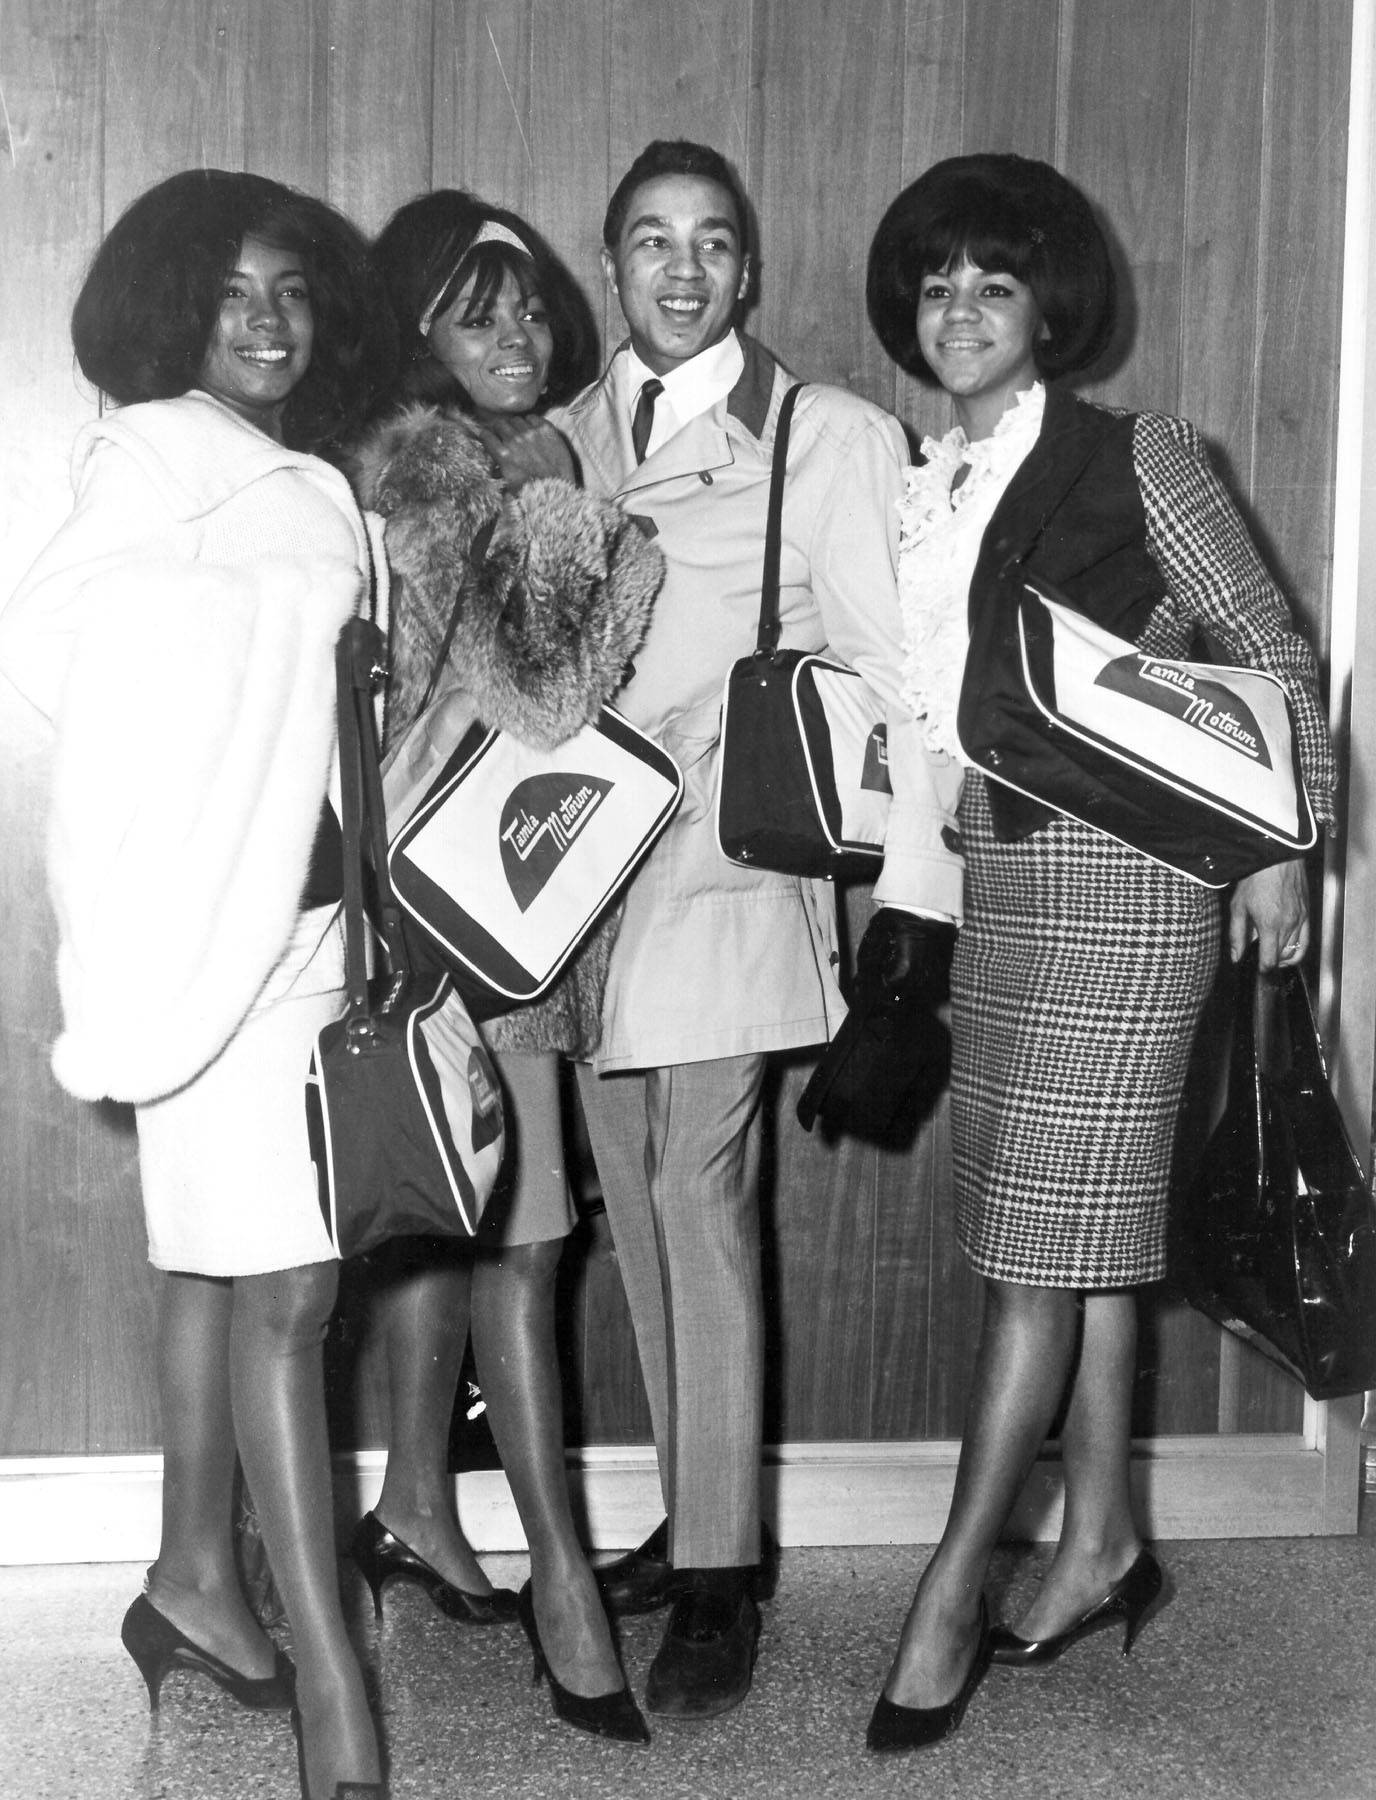 Your Heart Belongs to Me - The Supremes, made up of Mary Wilson, Diana Ross and Florence Ballard are not only fellow Tamla Motown artists, but also the faces behind some of Smokey's best songs. Records like &quot;Floy Joy,&quot; (Photo: Michael Ochs Archives/Getty Images)